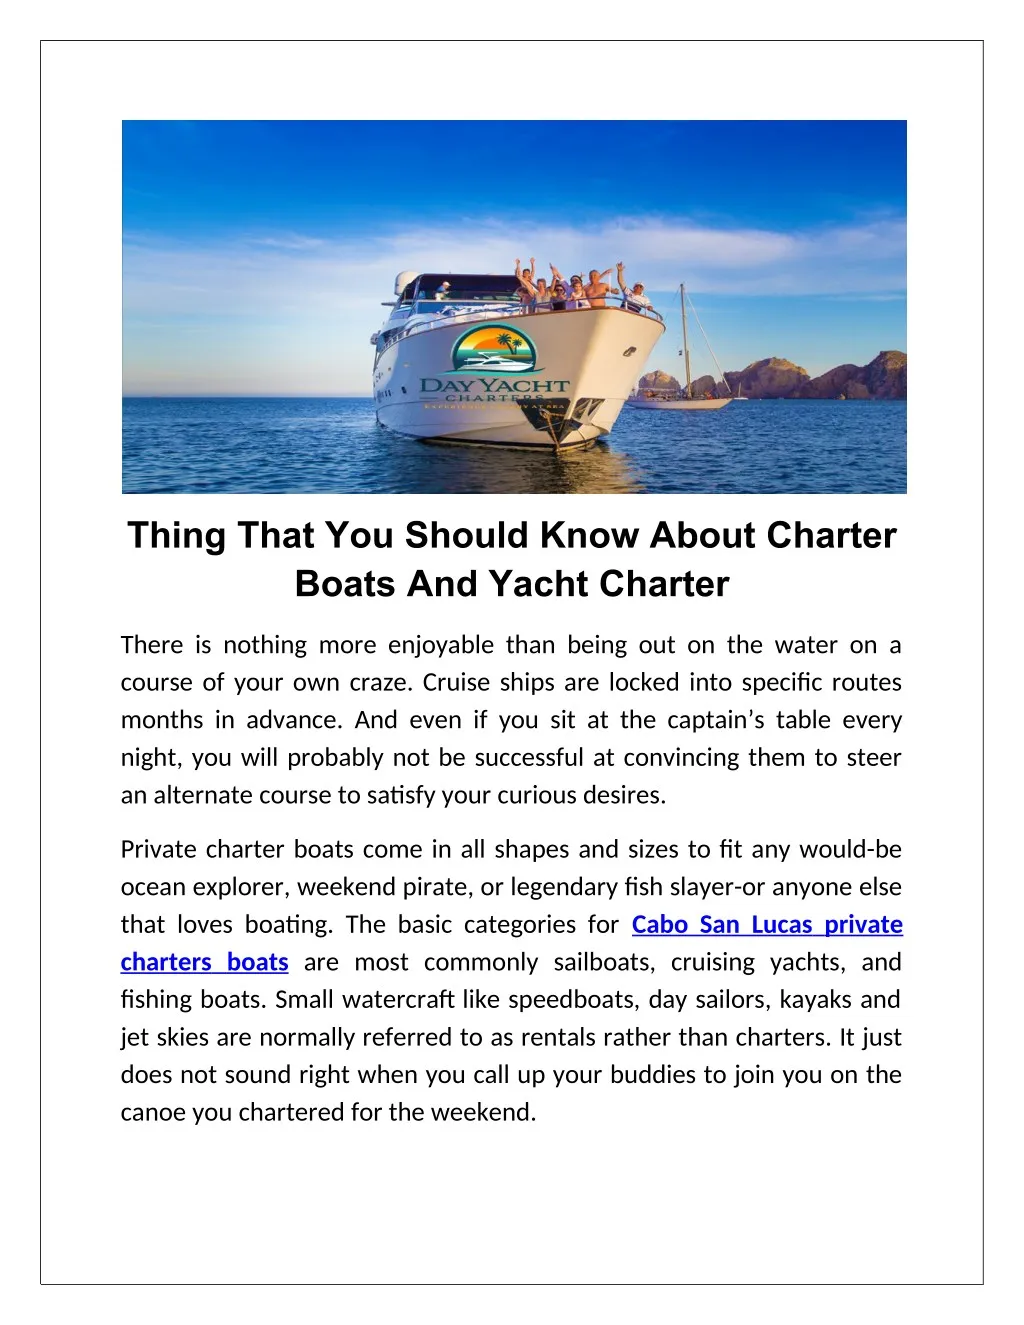 thing that you should know about charter boats